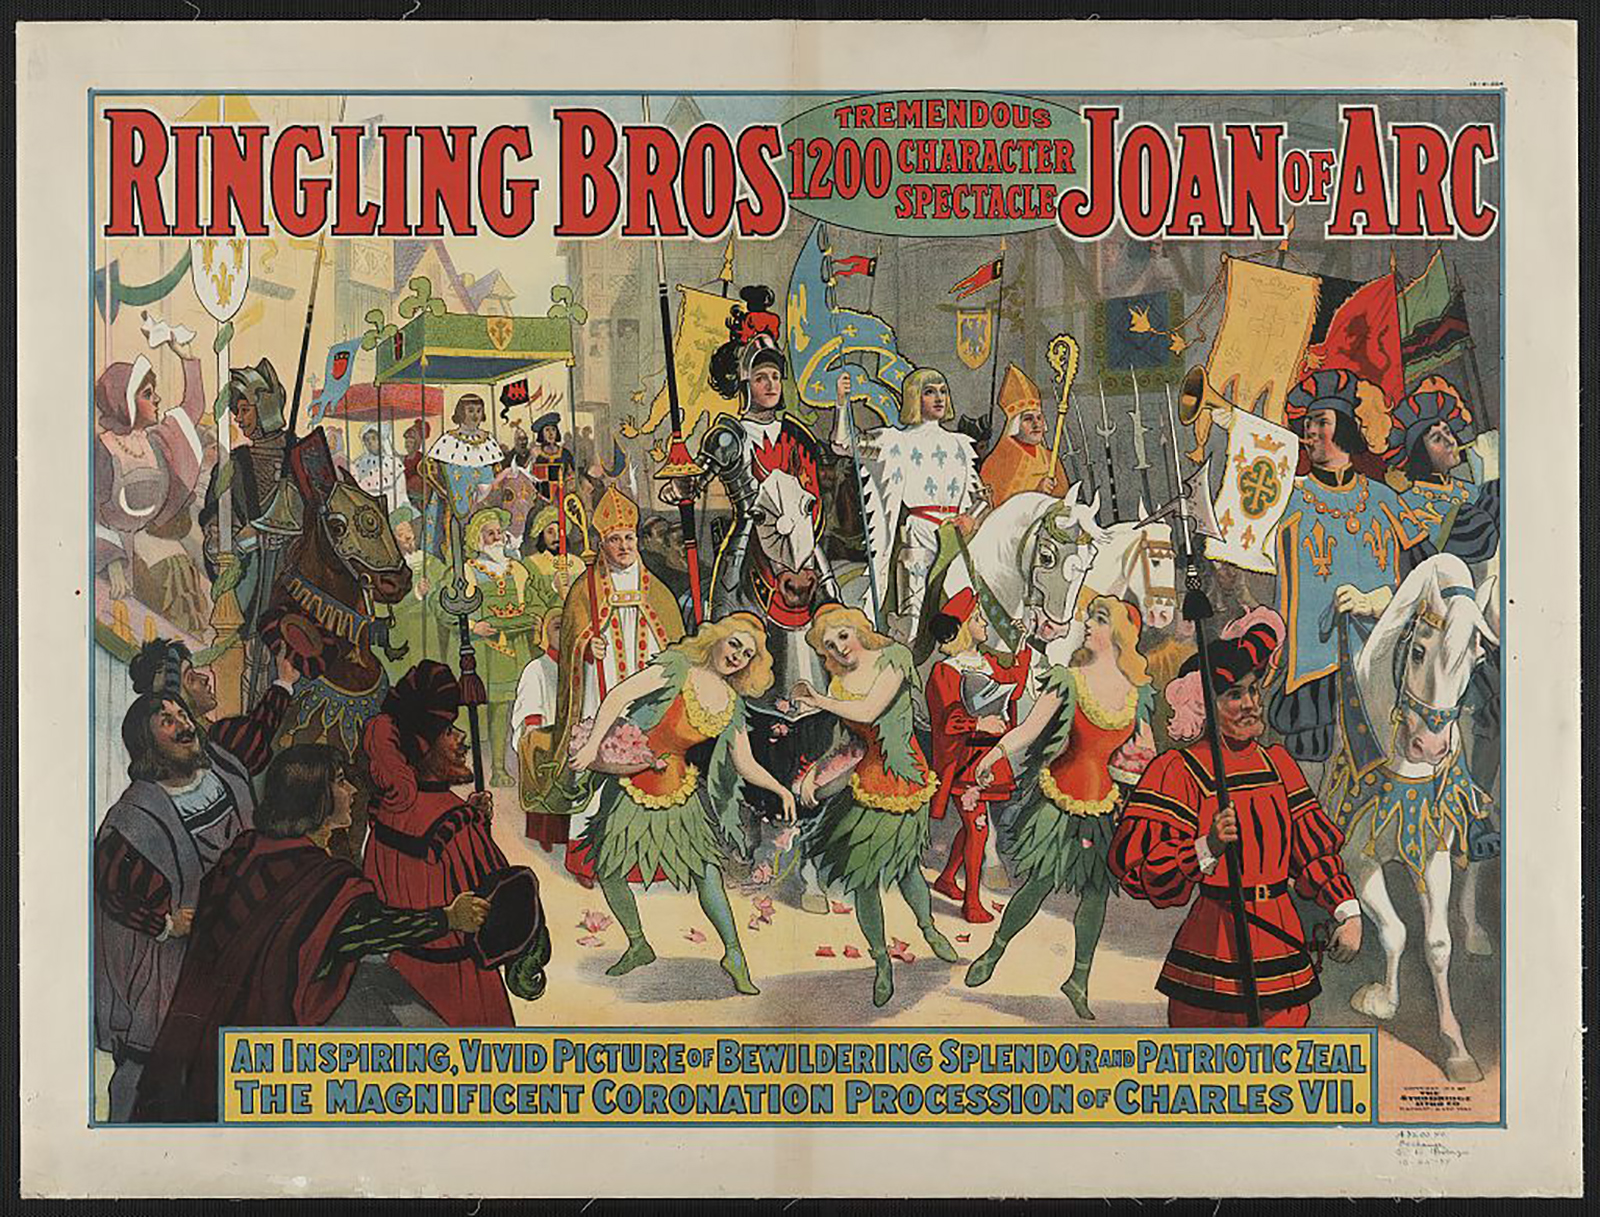 Ringling Brothers Circus depicting the coronation of Charles II of France with characters in colourful costumes parading on white horses through a crowd of people.